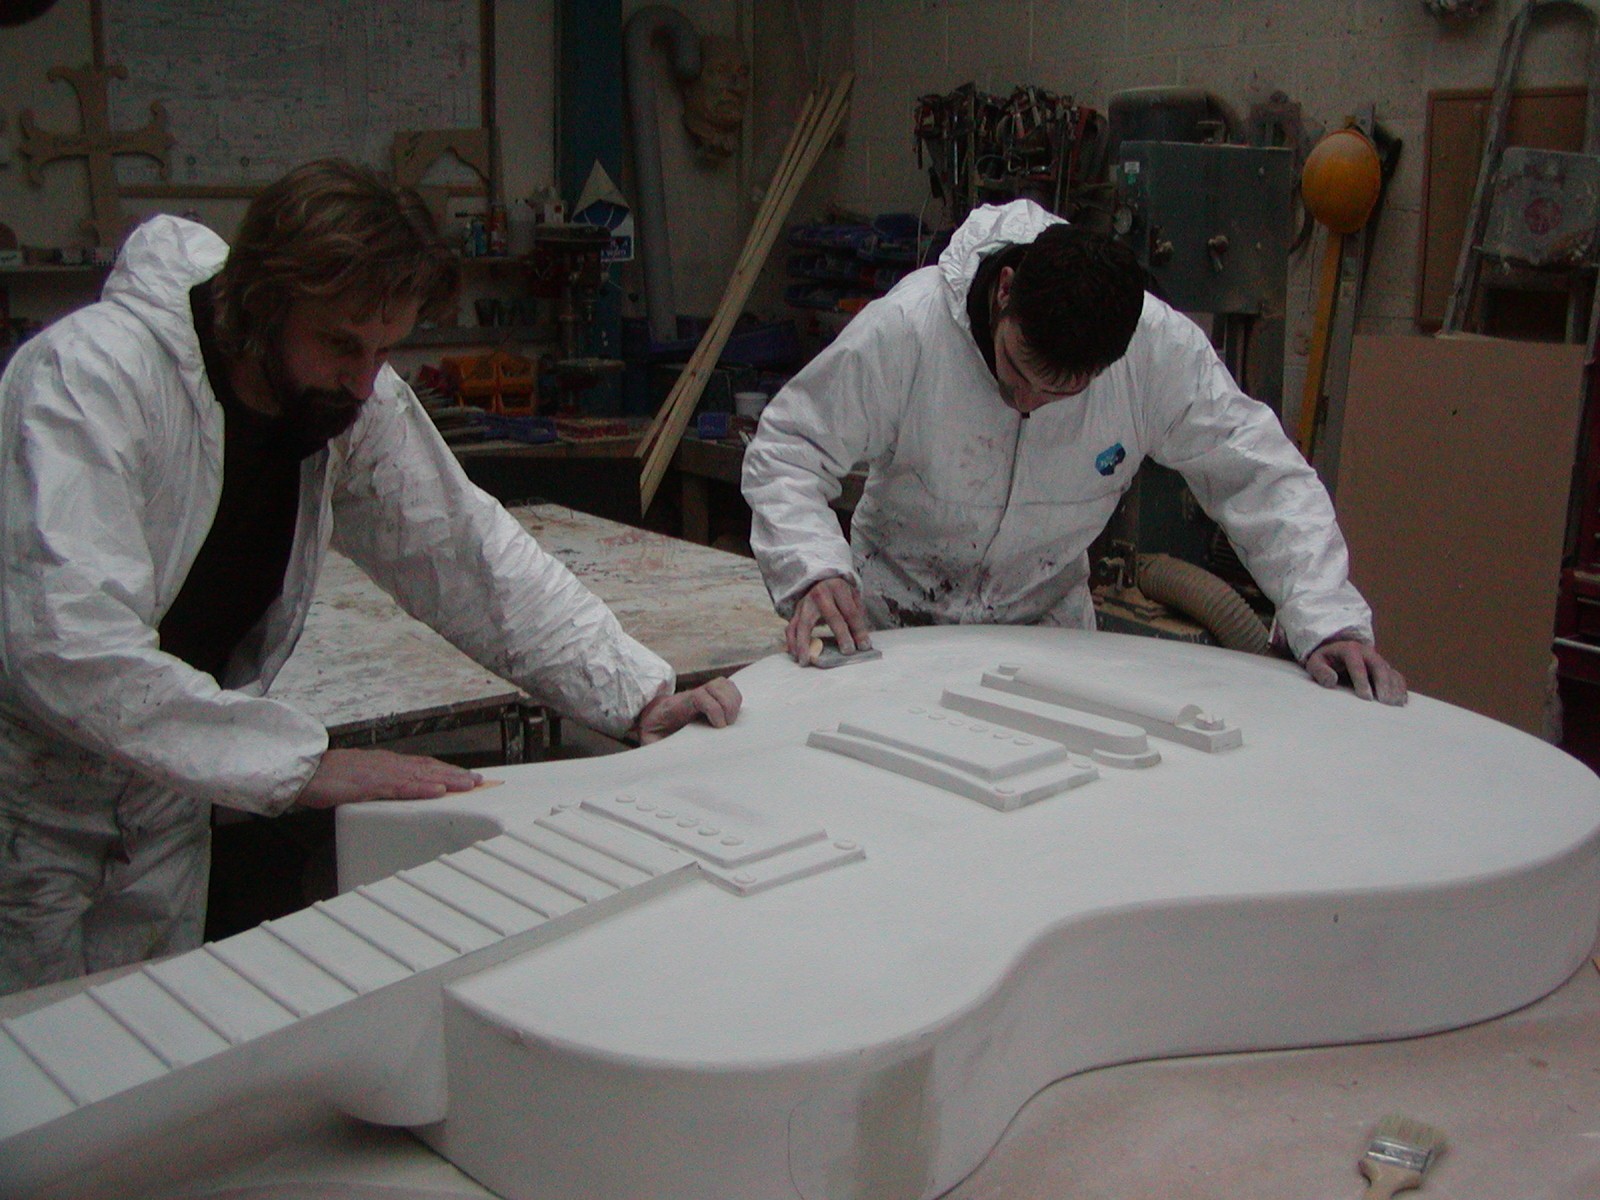 Guitars being made